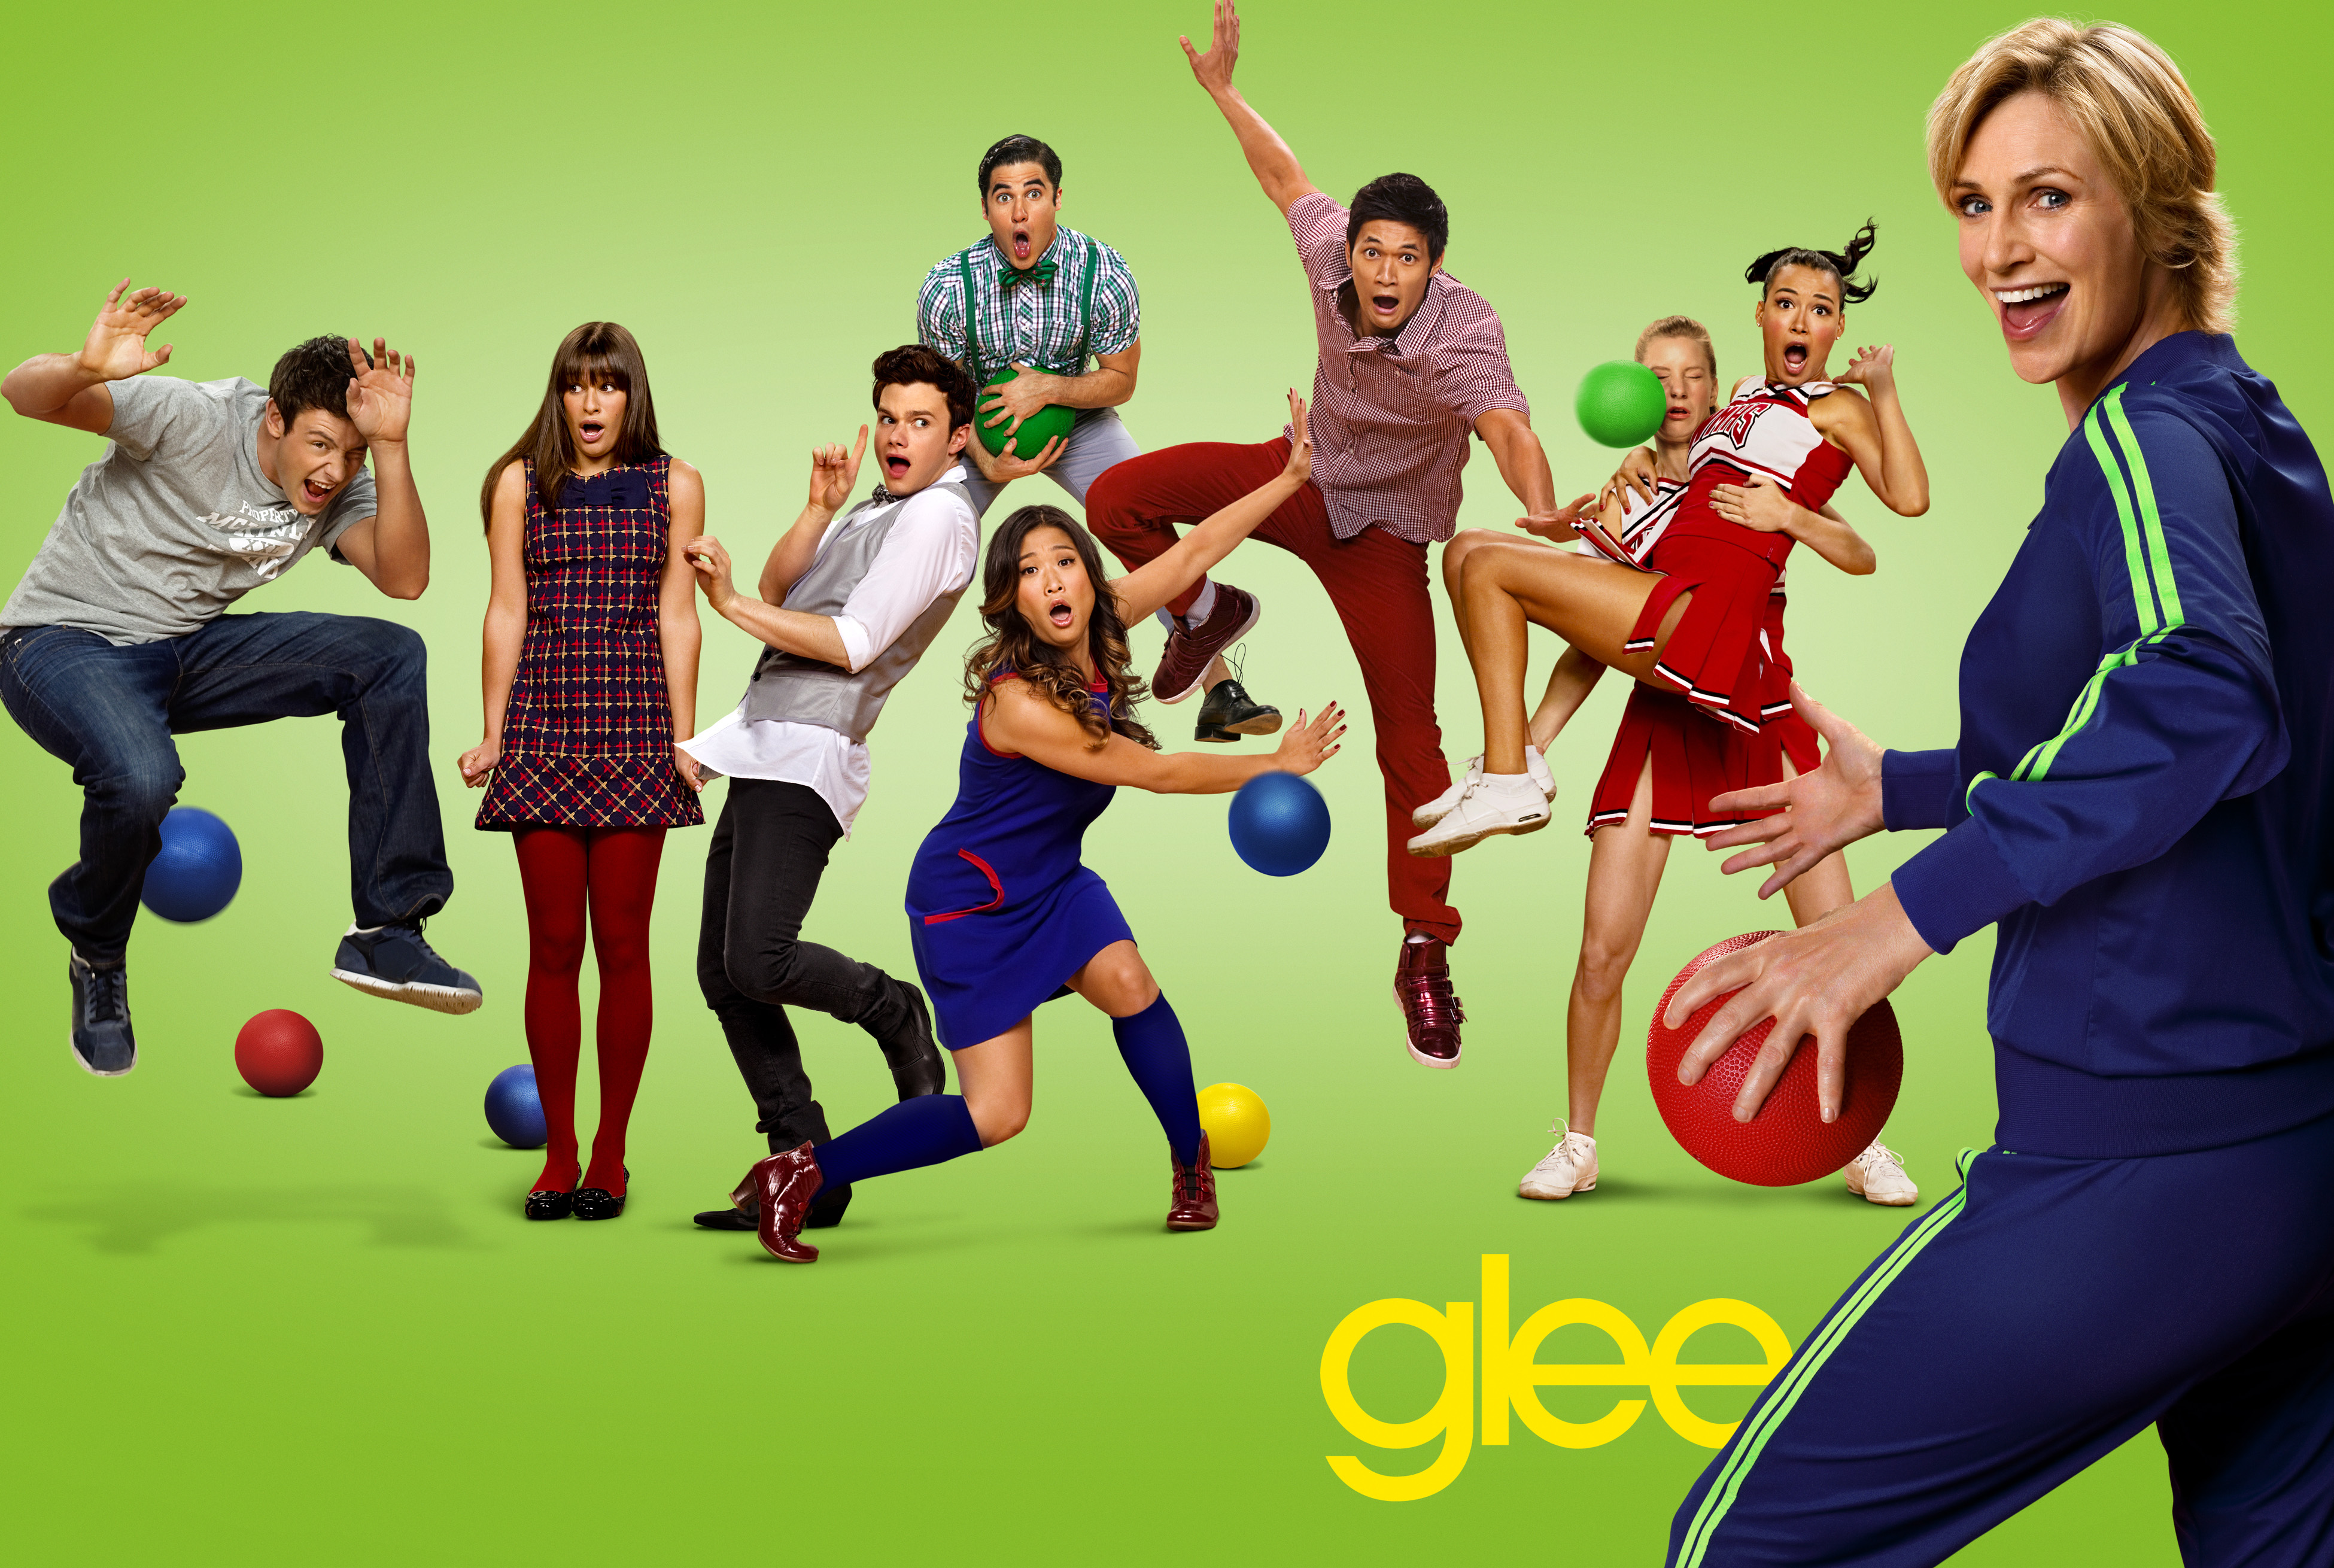 Glee Wallpapers Tv Show Hq Glee Pictures 4k Wallpapers 19